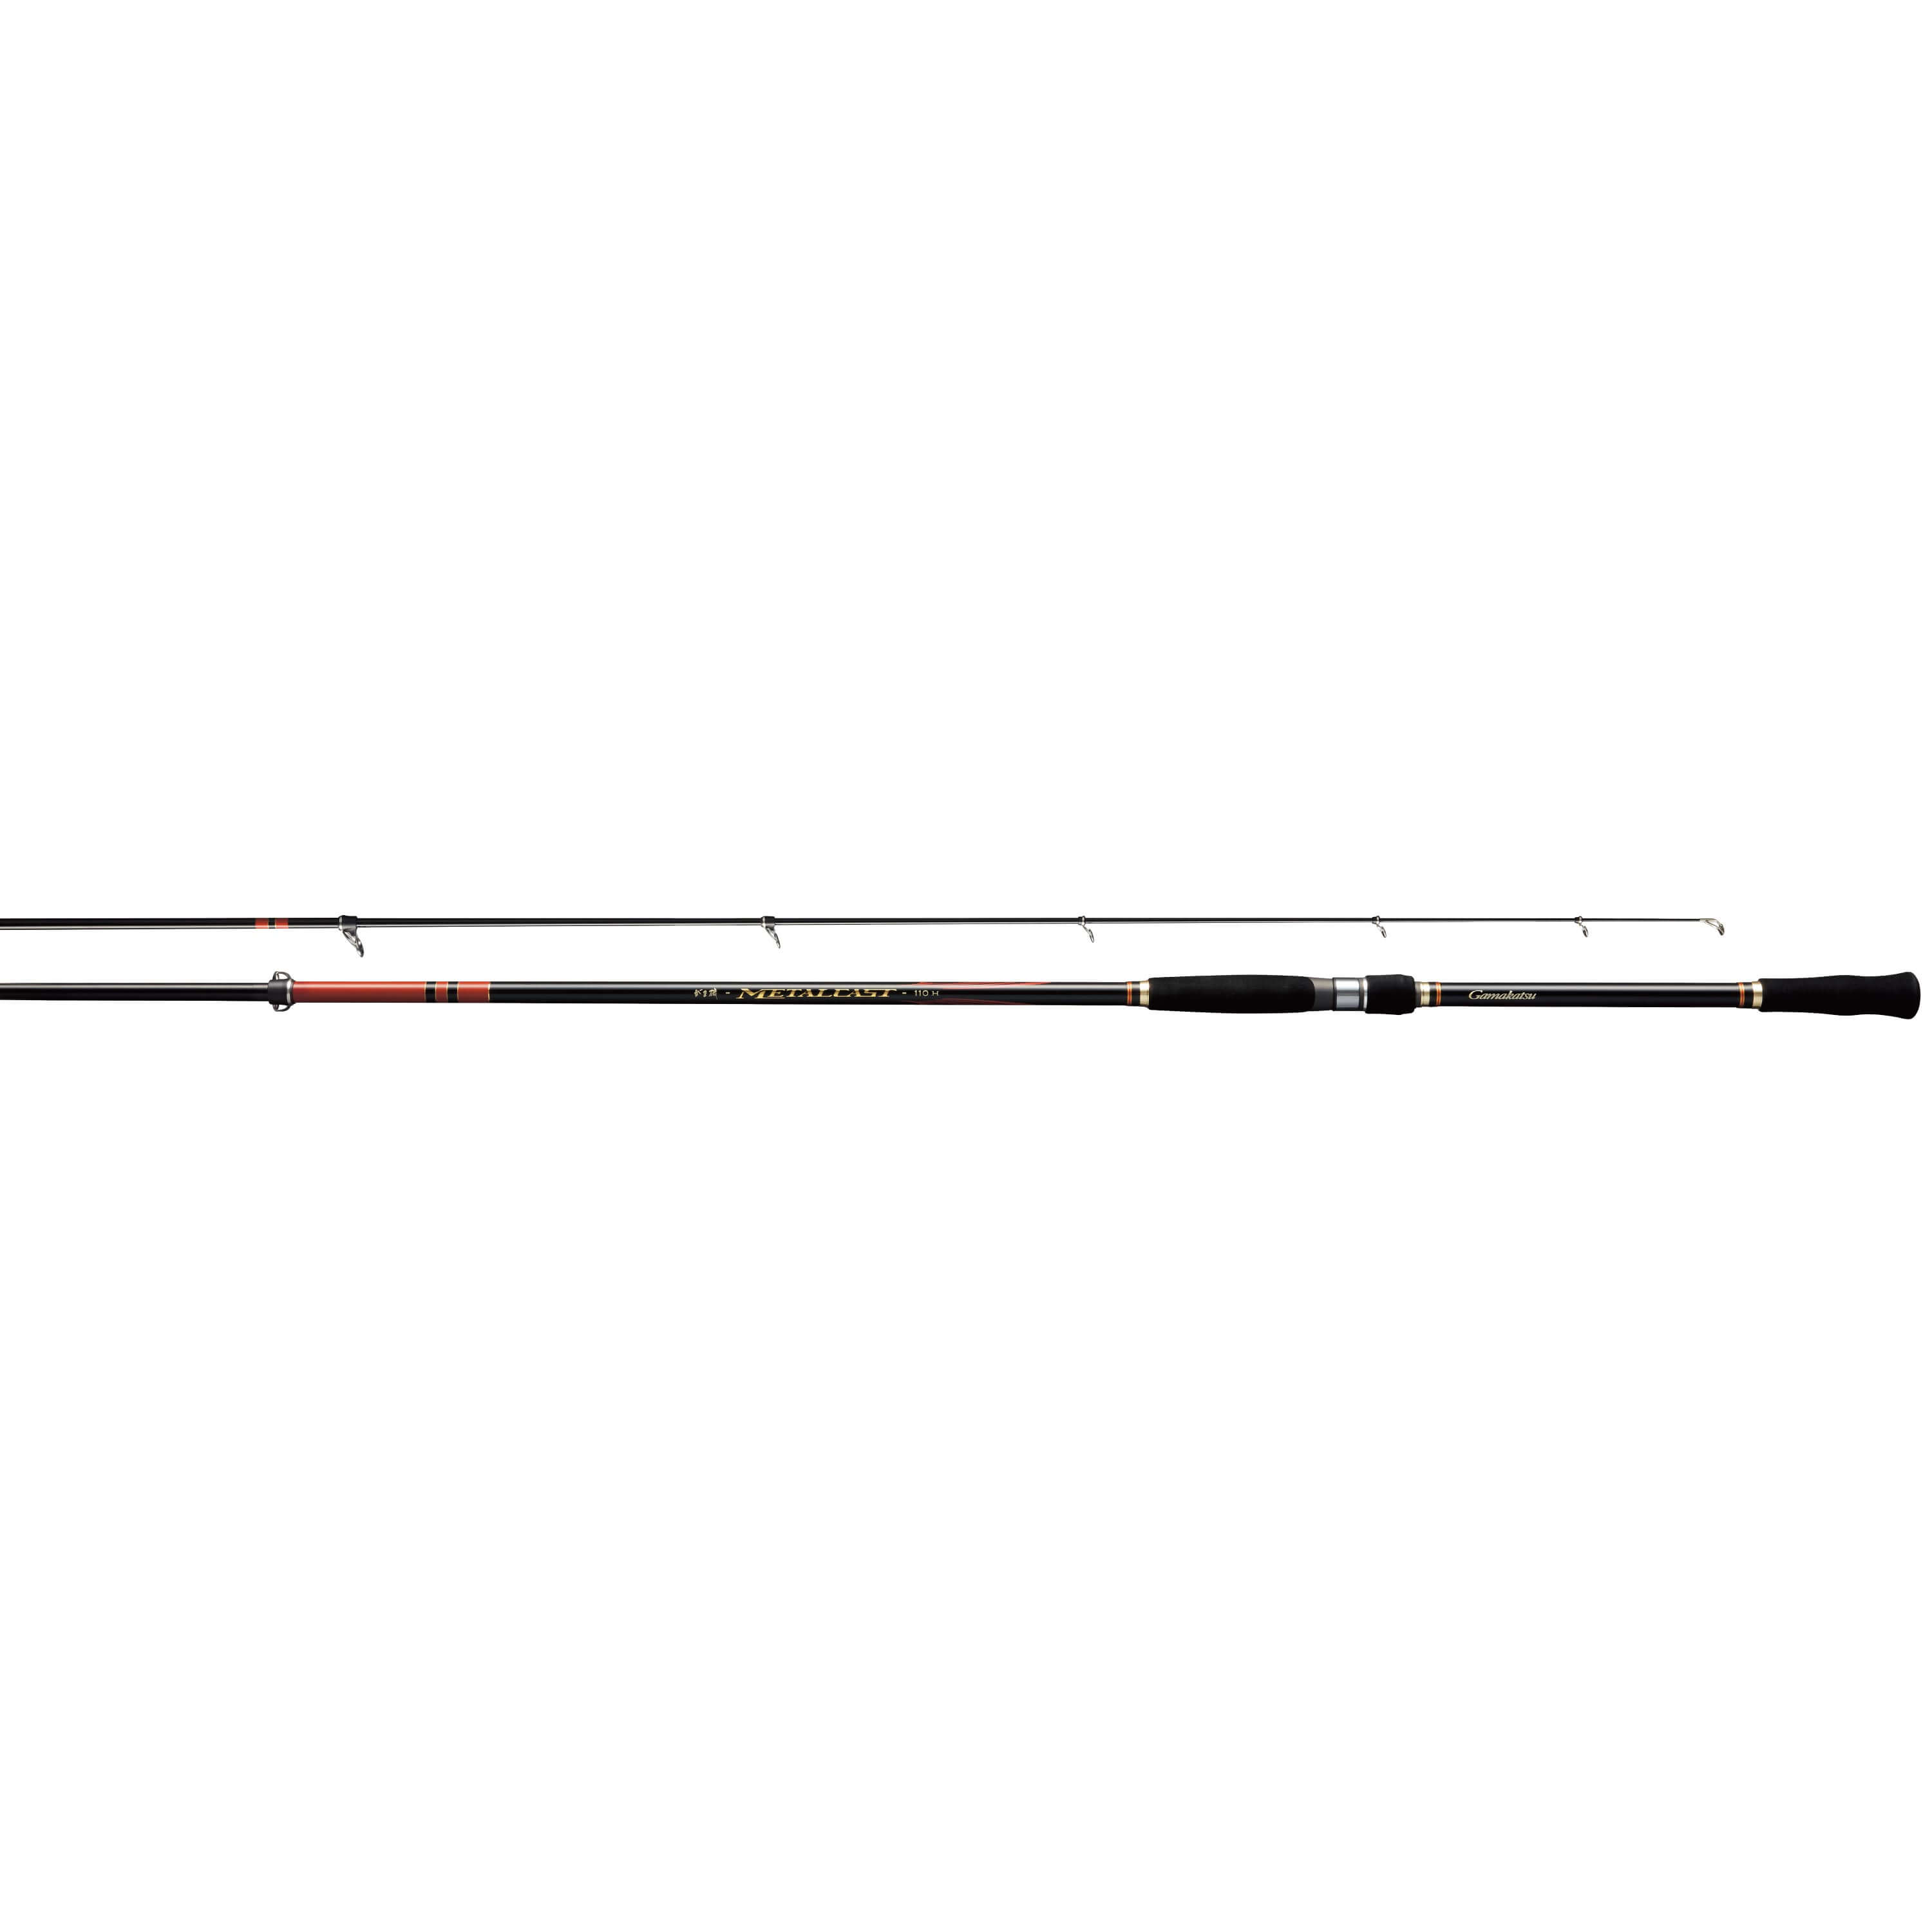 Telescopic Rods Archives - Japan Fishing and Tackle News